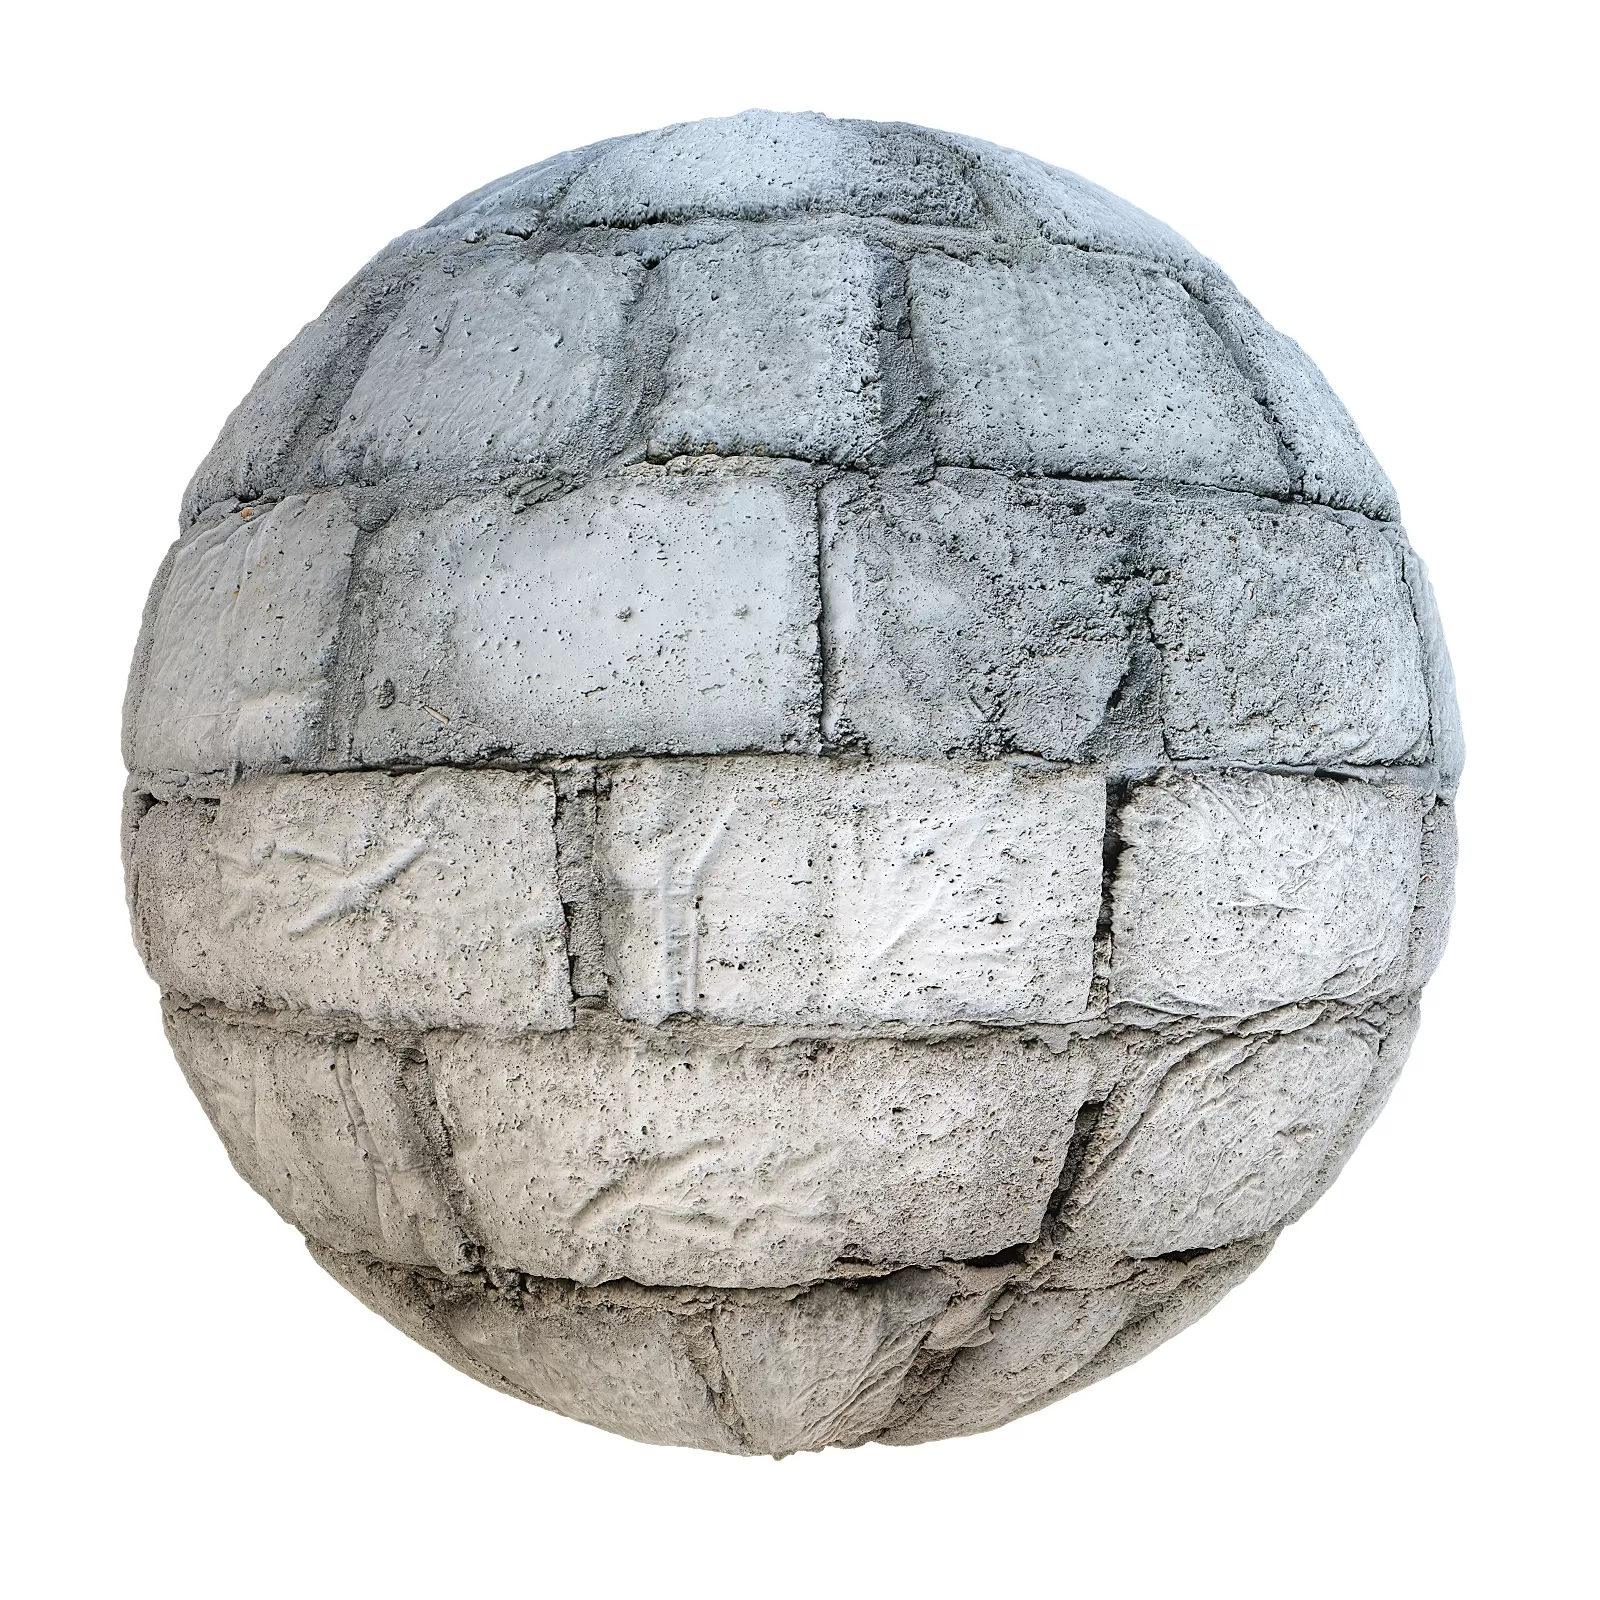 3ds Max Files – Texture – 9 – Stone Texture – 19 – Stone Texture by Minh Nguyen